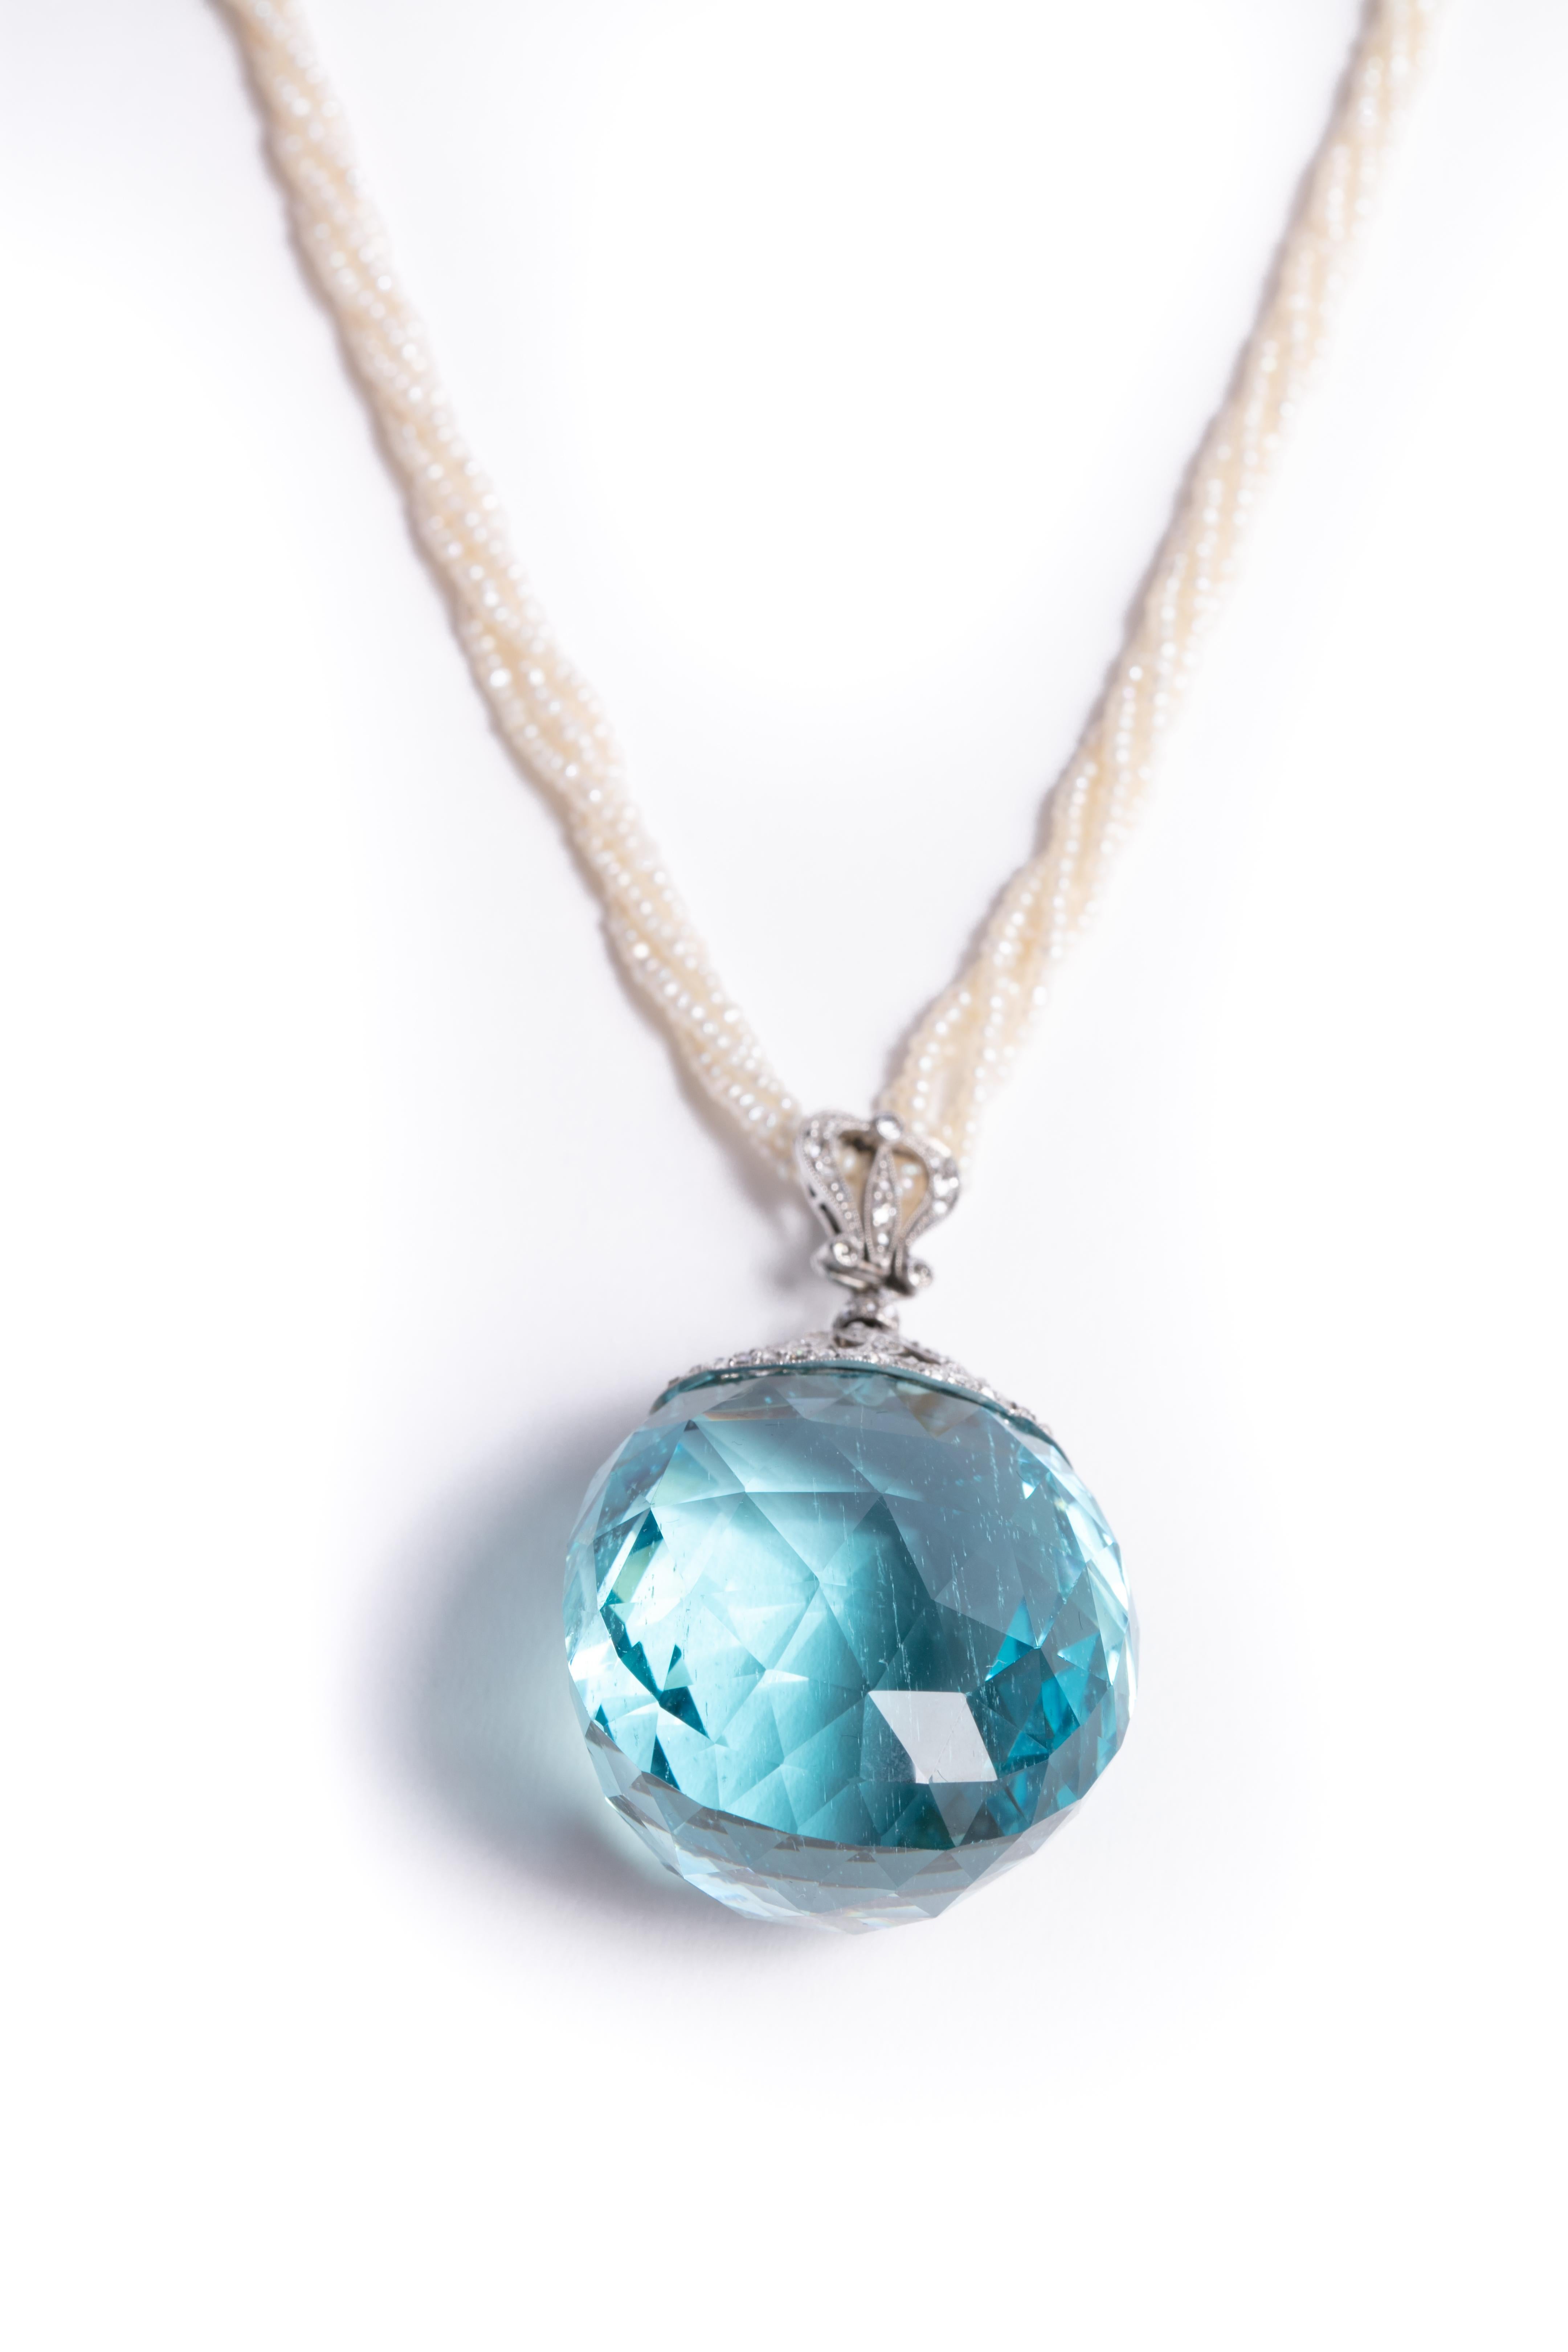 An absolutely stunning 200ct hand - faceted aquamarine pendant, estimated to be from the 1870's suspended by the original seed pearls which have been restrung.
This detachable pendant looks amazing accented by the pearls but would be equally